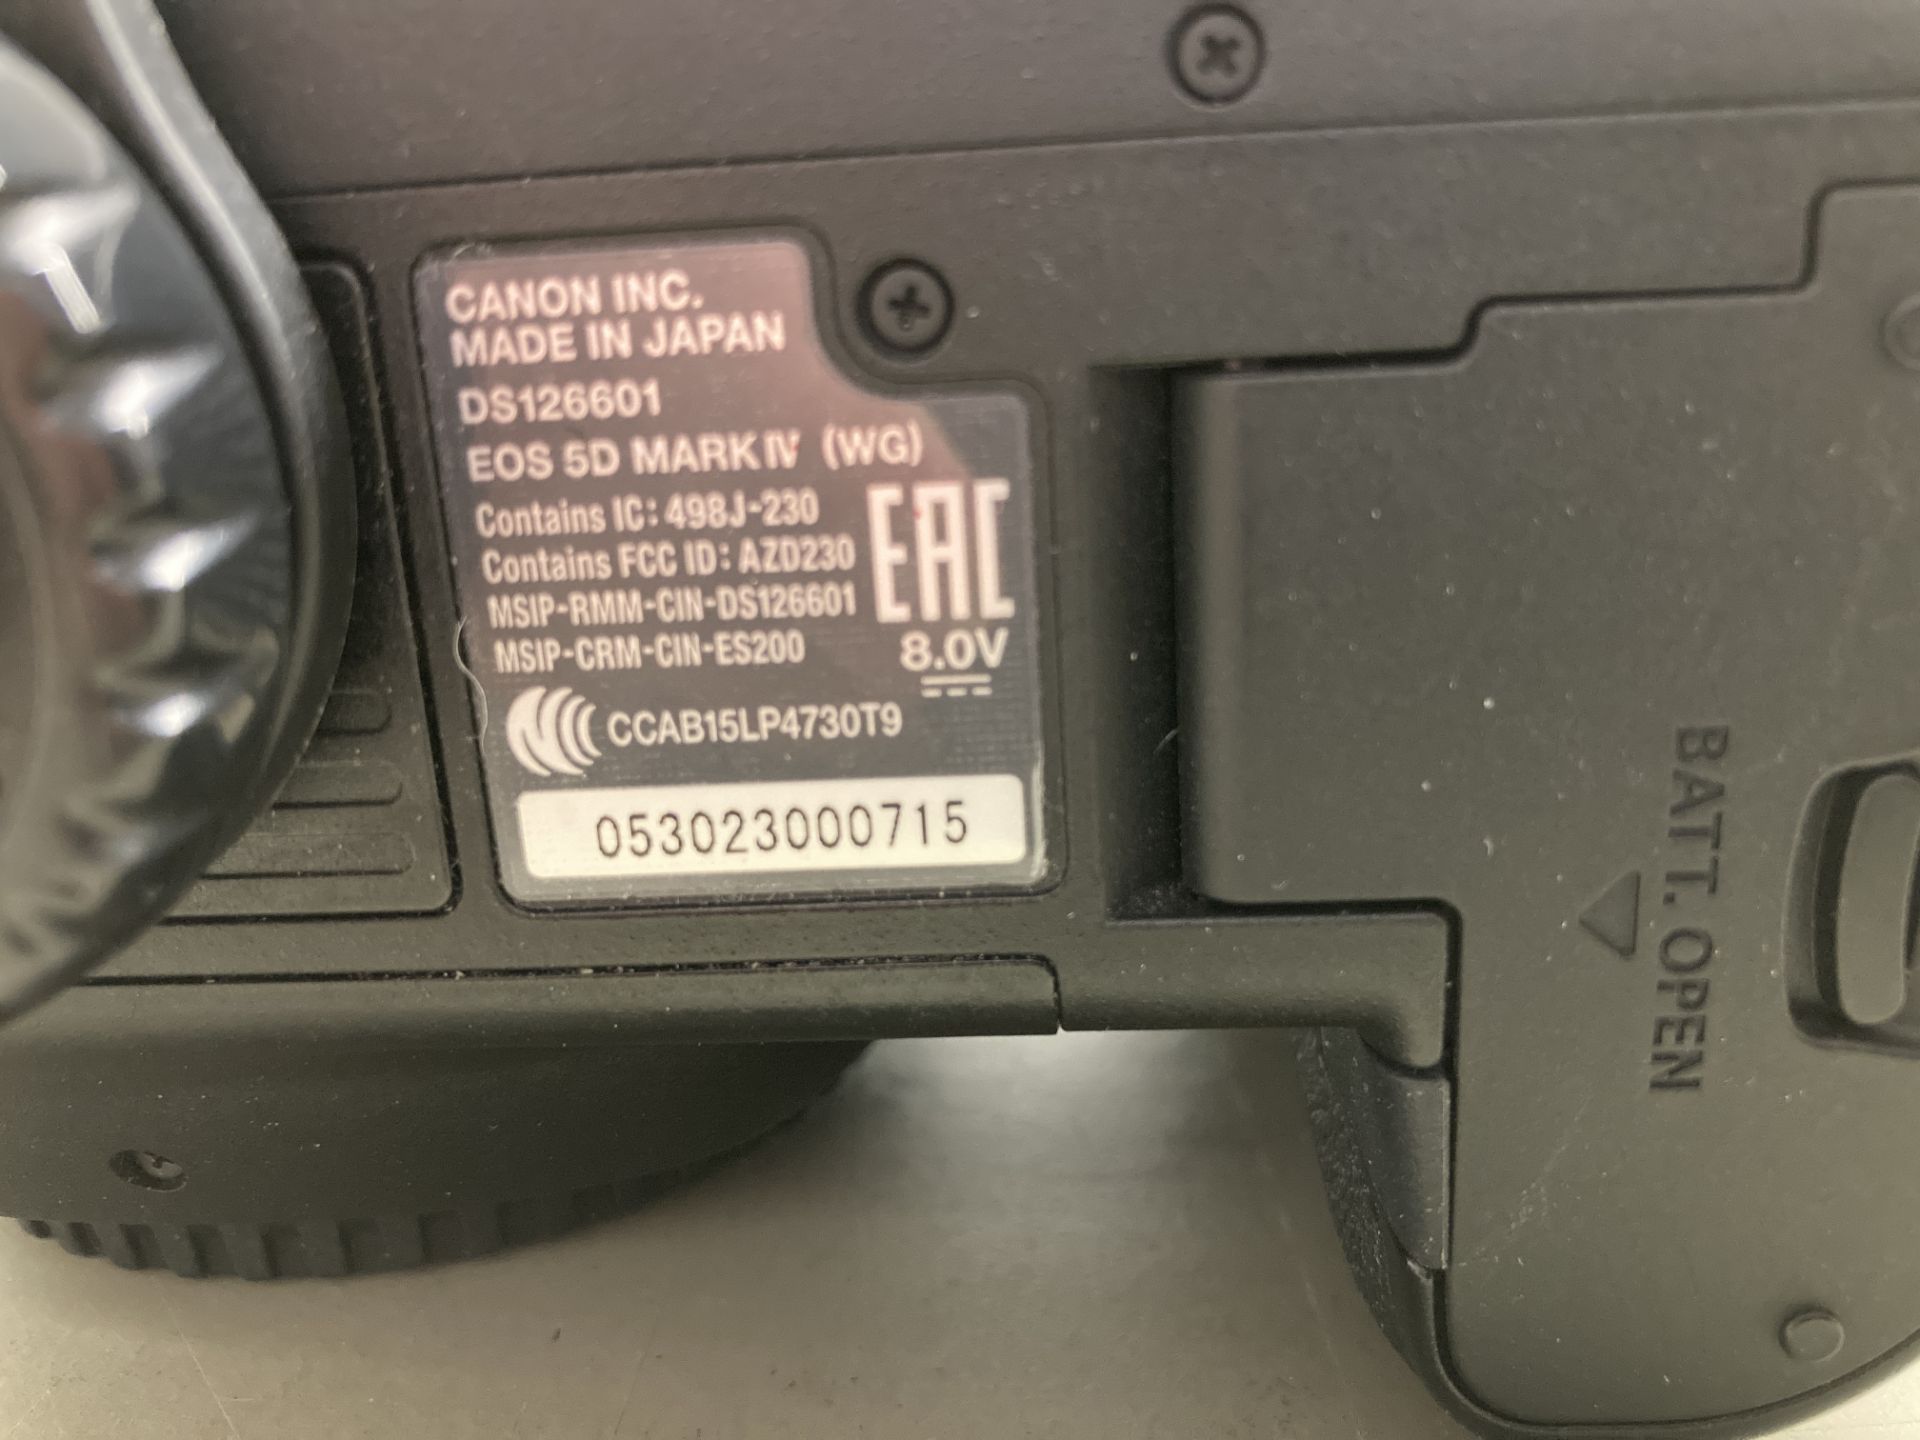 Canon EOS 5D Mark IV (WG) DSLR camera body with charger, spare batteries and leads - Image 14 of 22